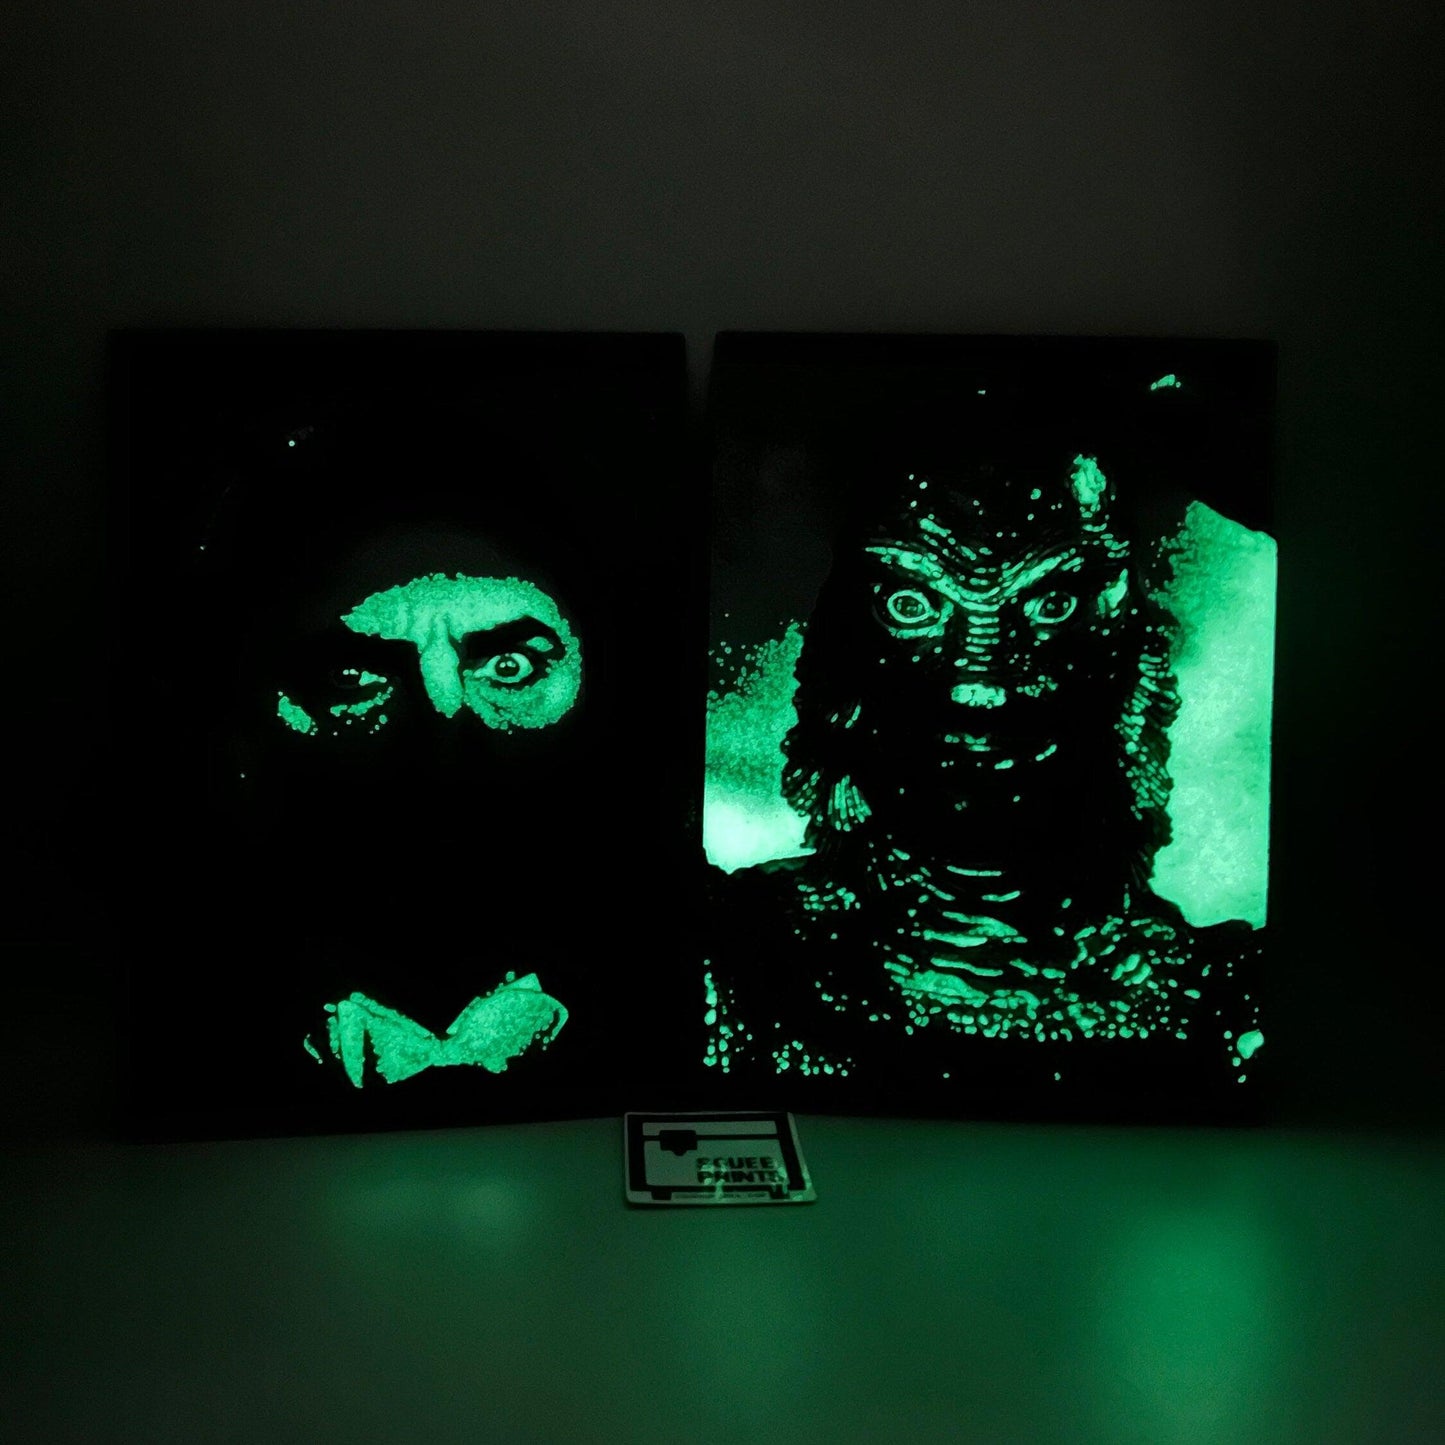 Creature from the Black Lagoon | 3D Painting | Glow in the Dark - Squee Prints